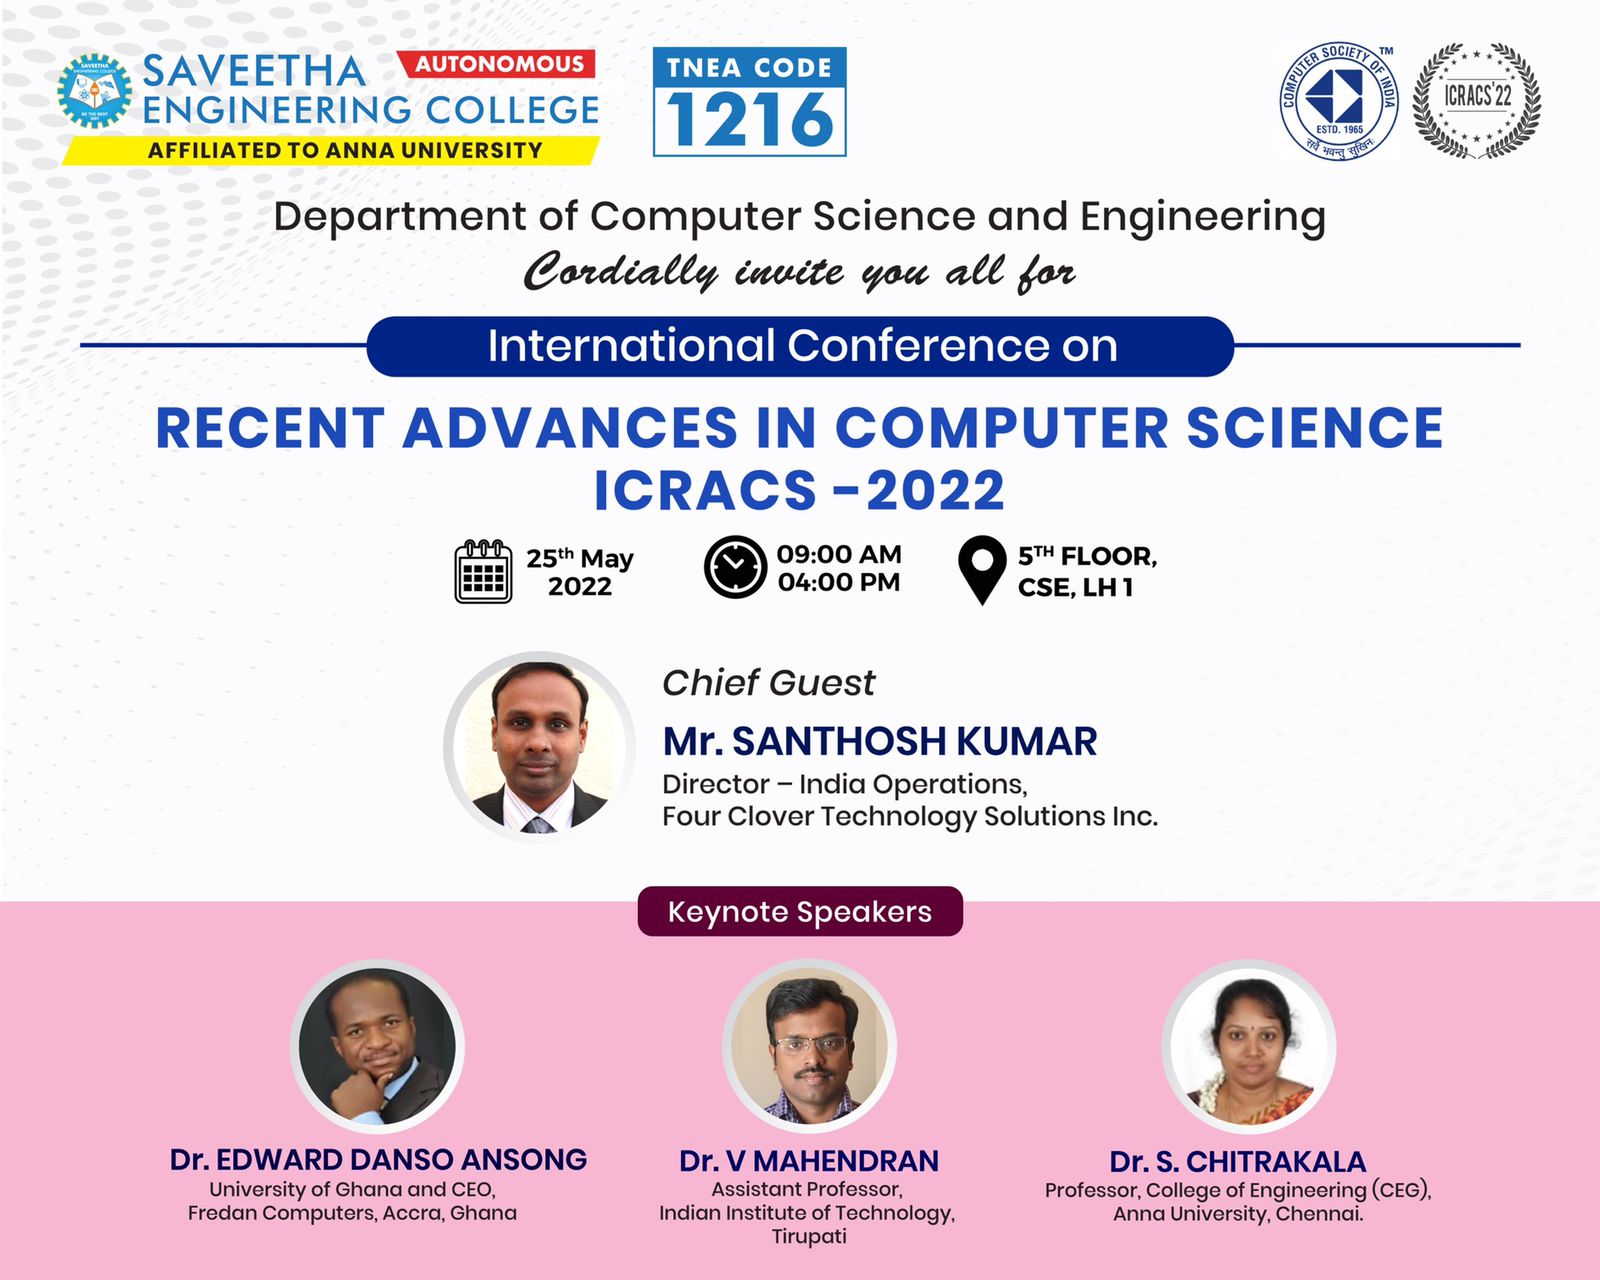 International Conference organized by Department of CSE of Saveetha Engineering College 1